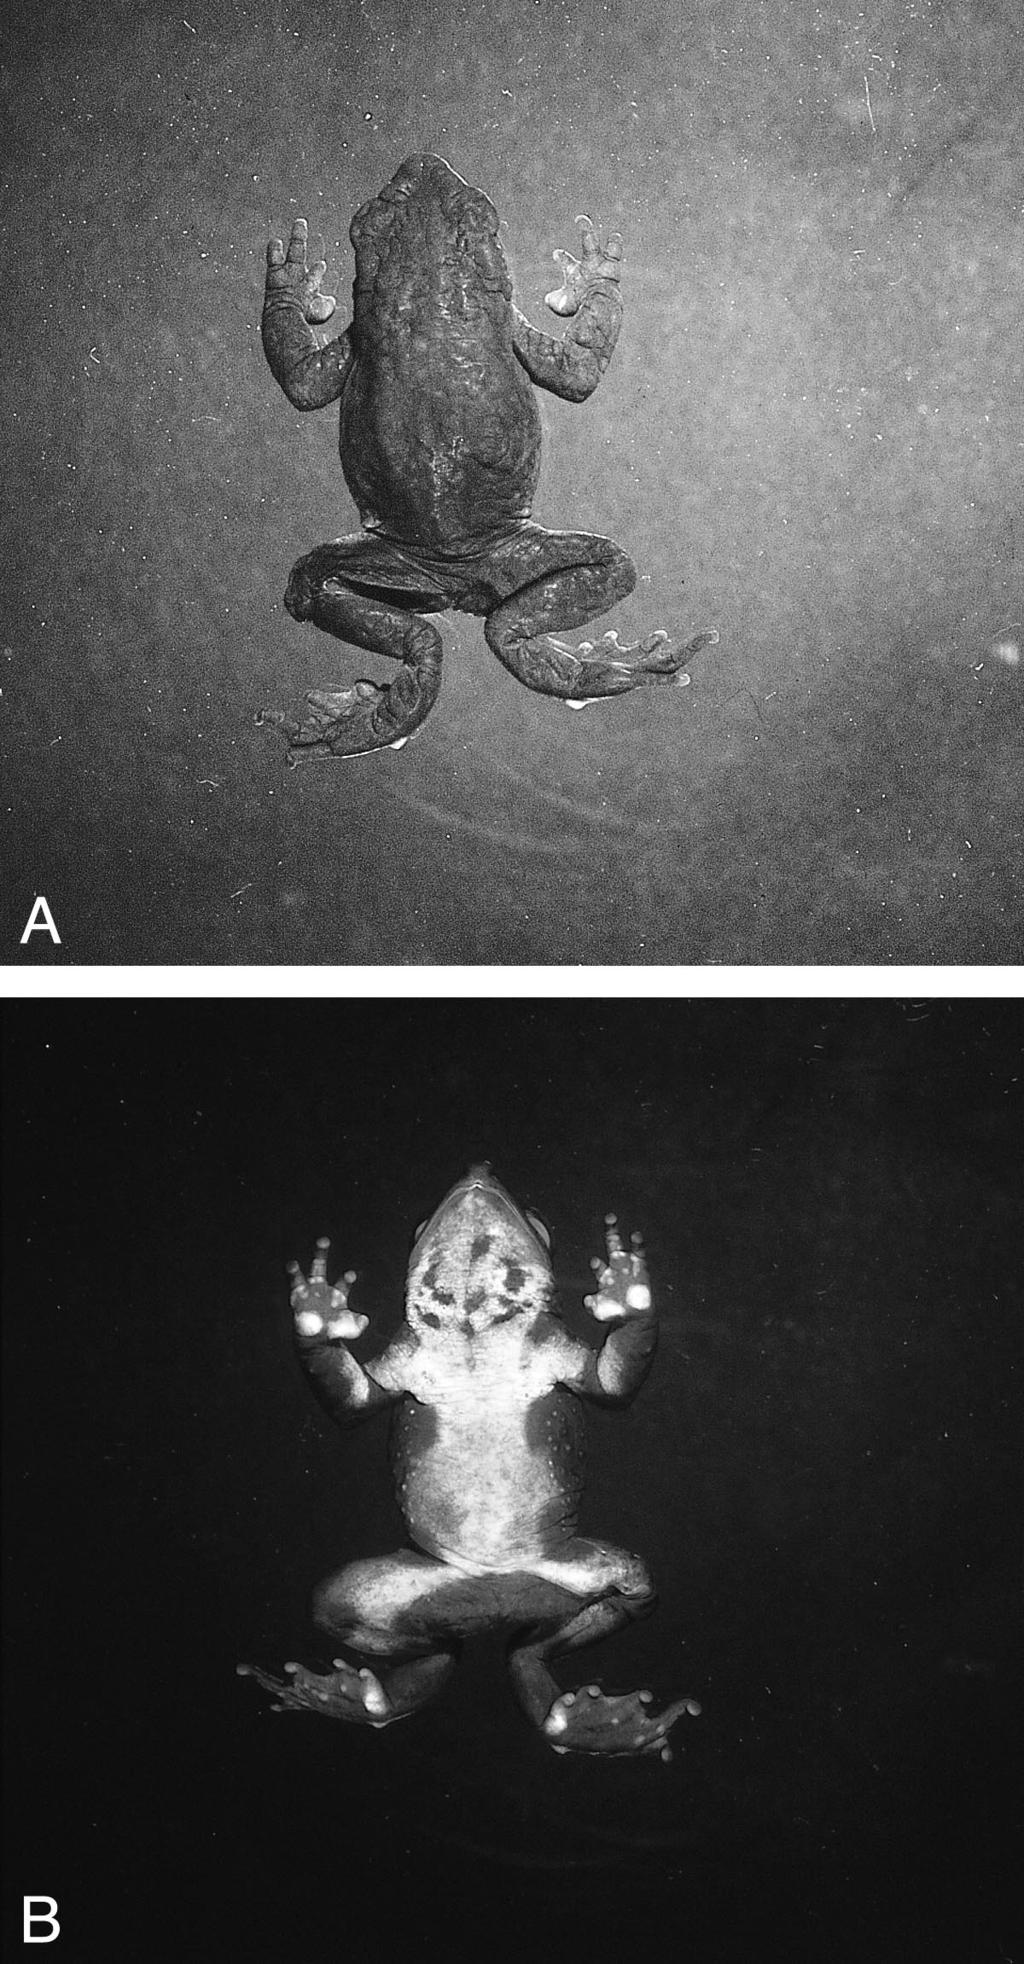 June 2002] HERPETOLOGICA 237 FIG. 6. Holotype of Atelopus nanay: (A) dorsal and (B) ventral views. Male SVL 24.4 mm. black and lacks a conspicuous pupilary ring. Measurements (in mm): SVL 24.